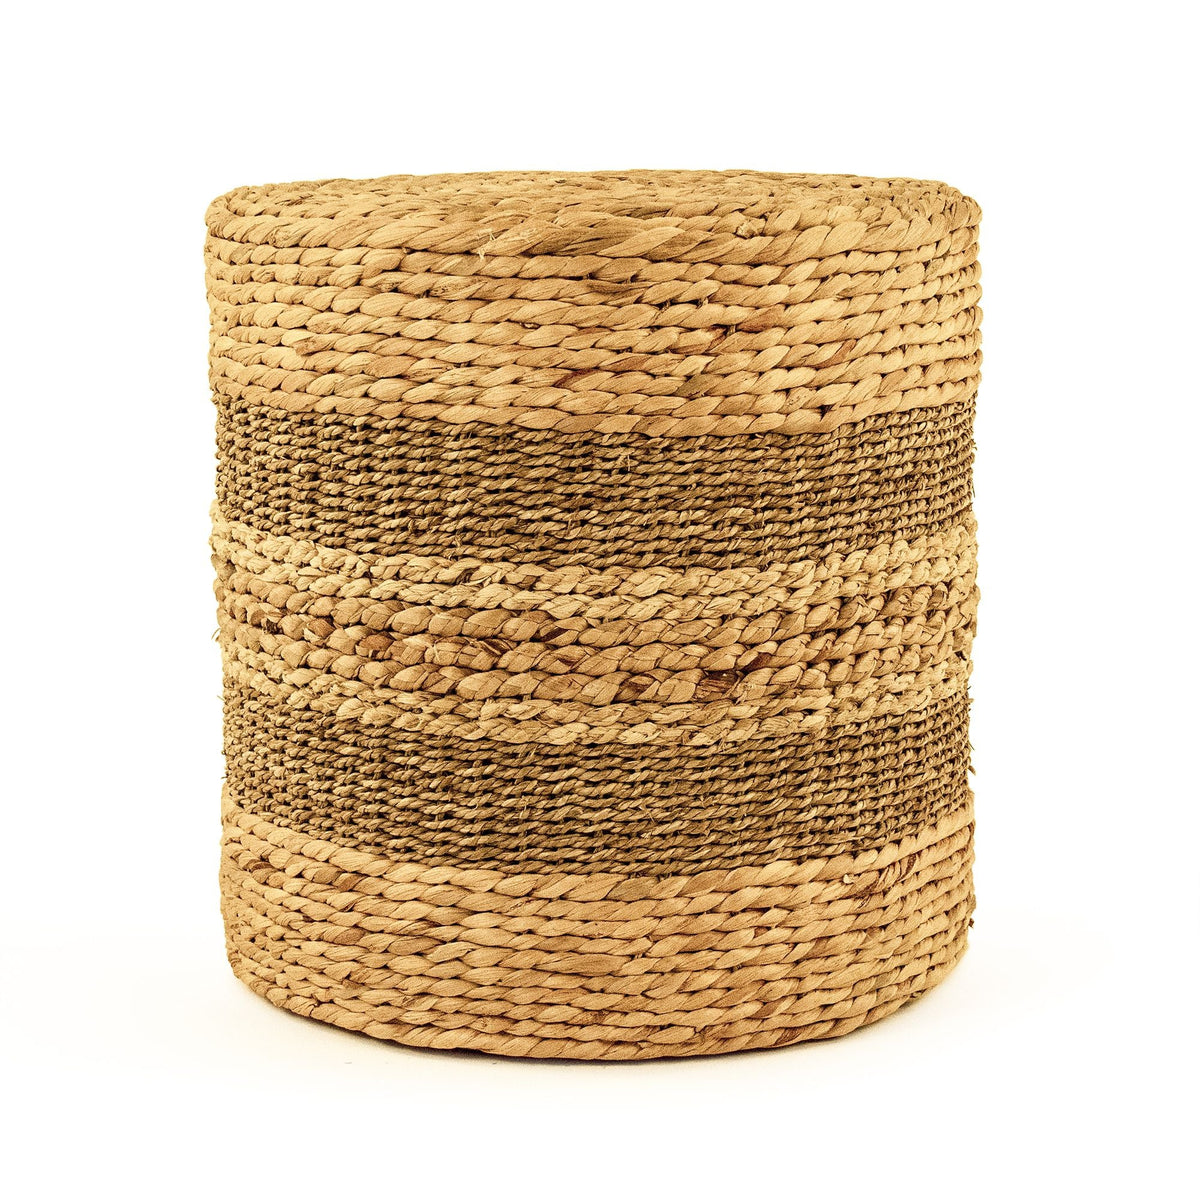 Woven Cylinder Stool by Zentique